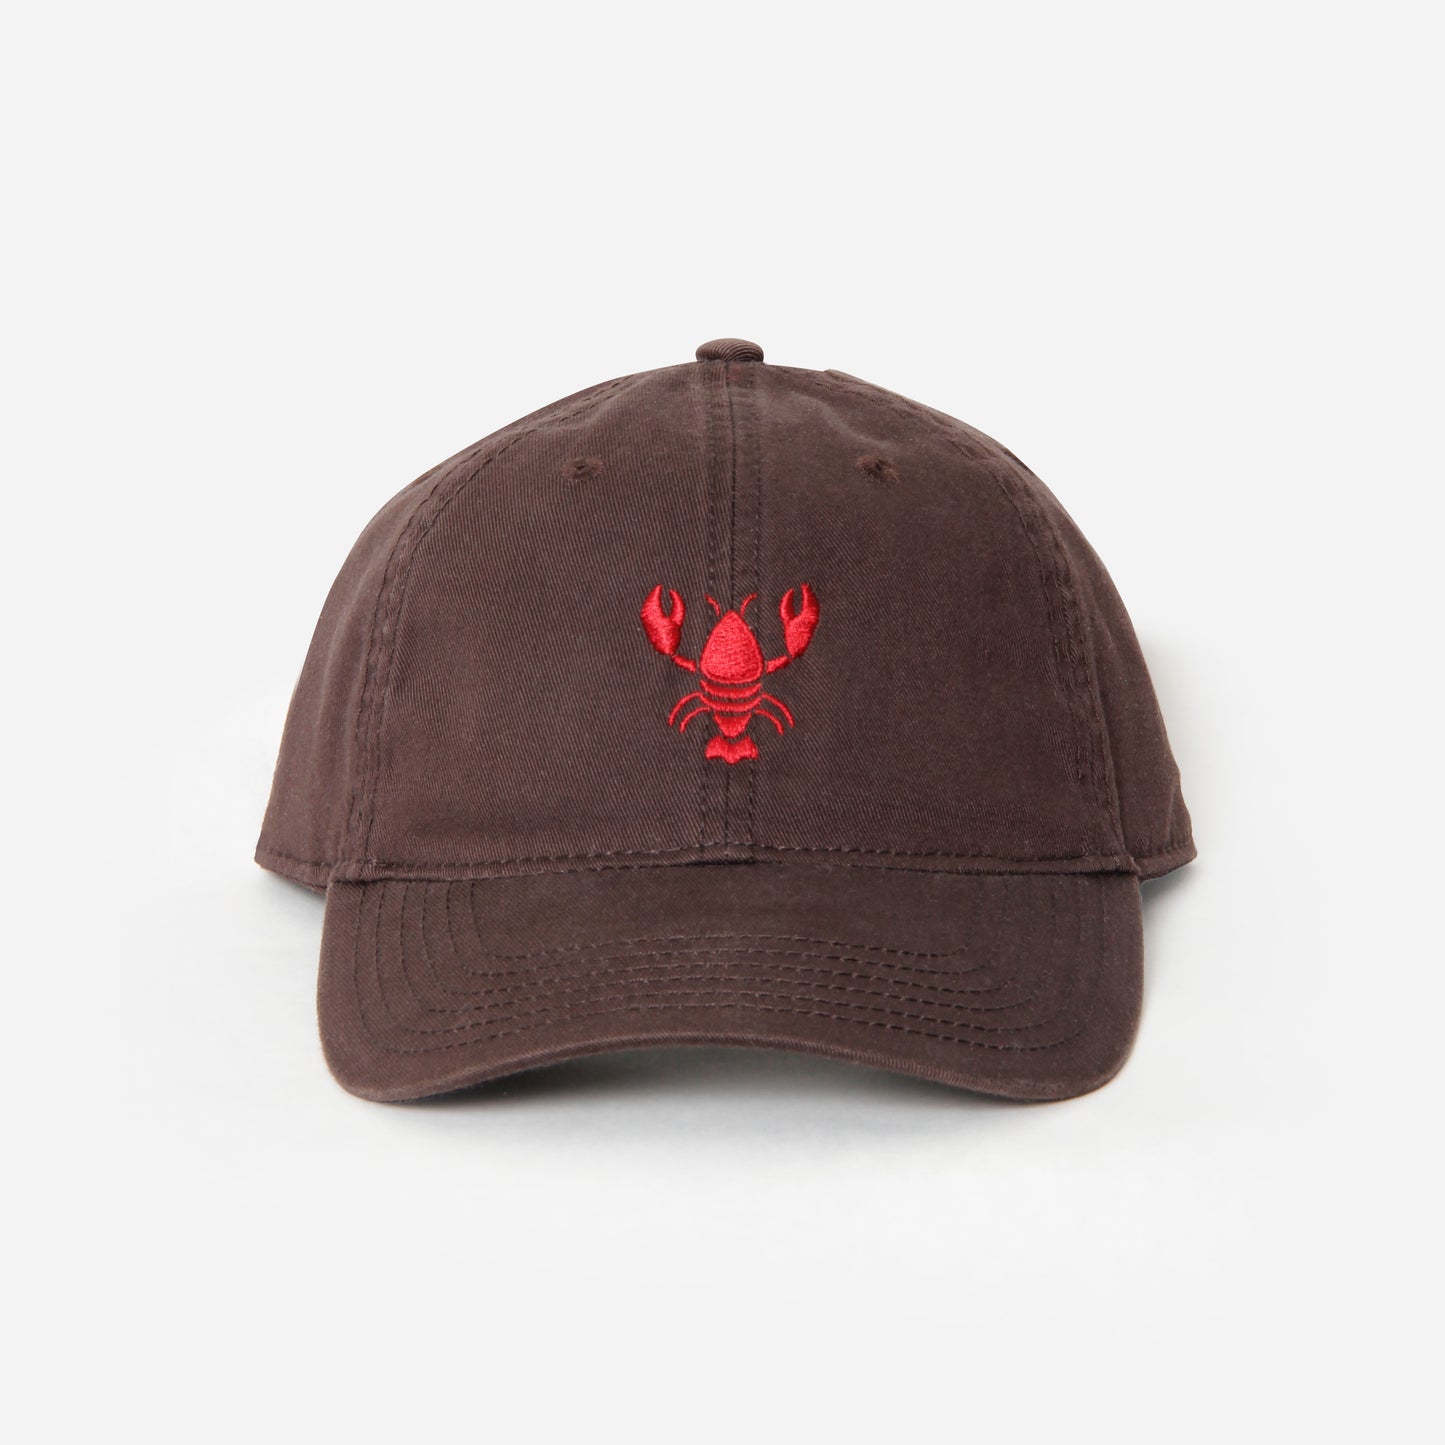 Copps Island Lobster Hat